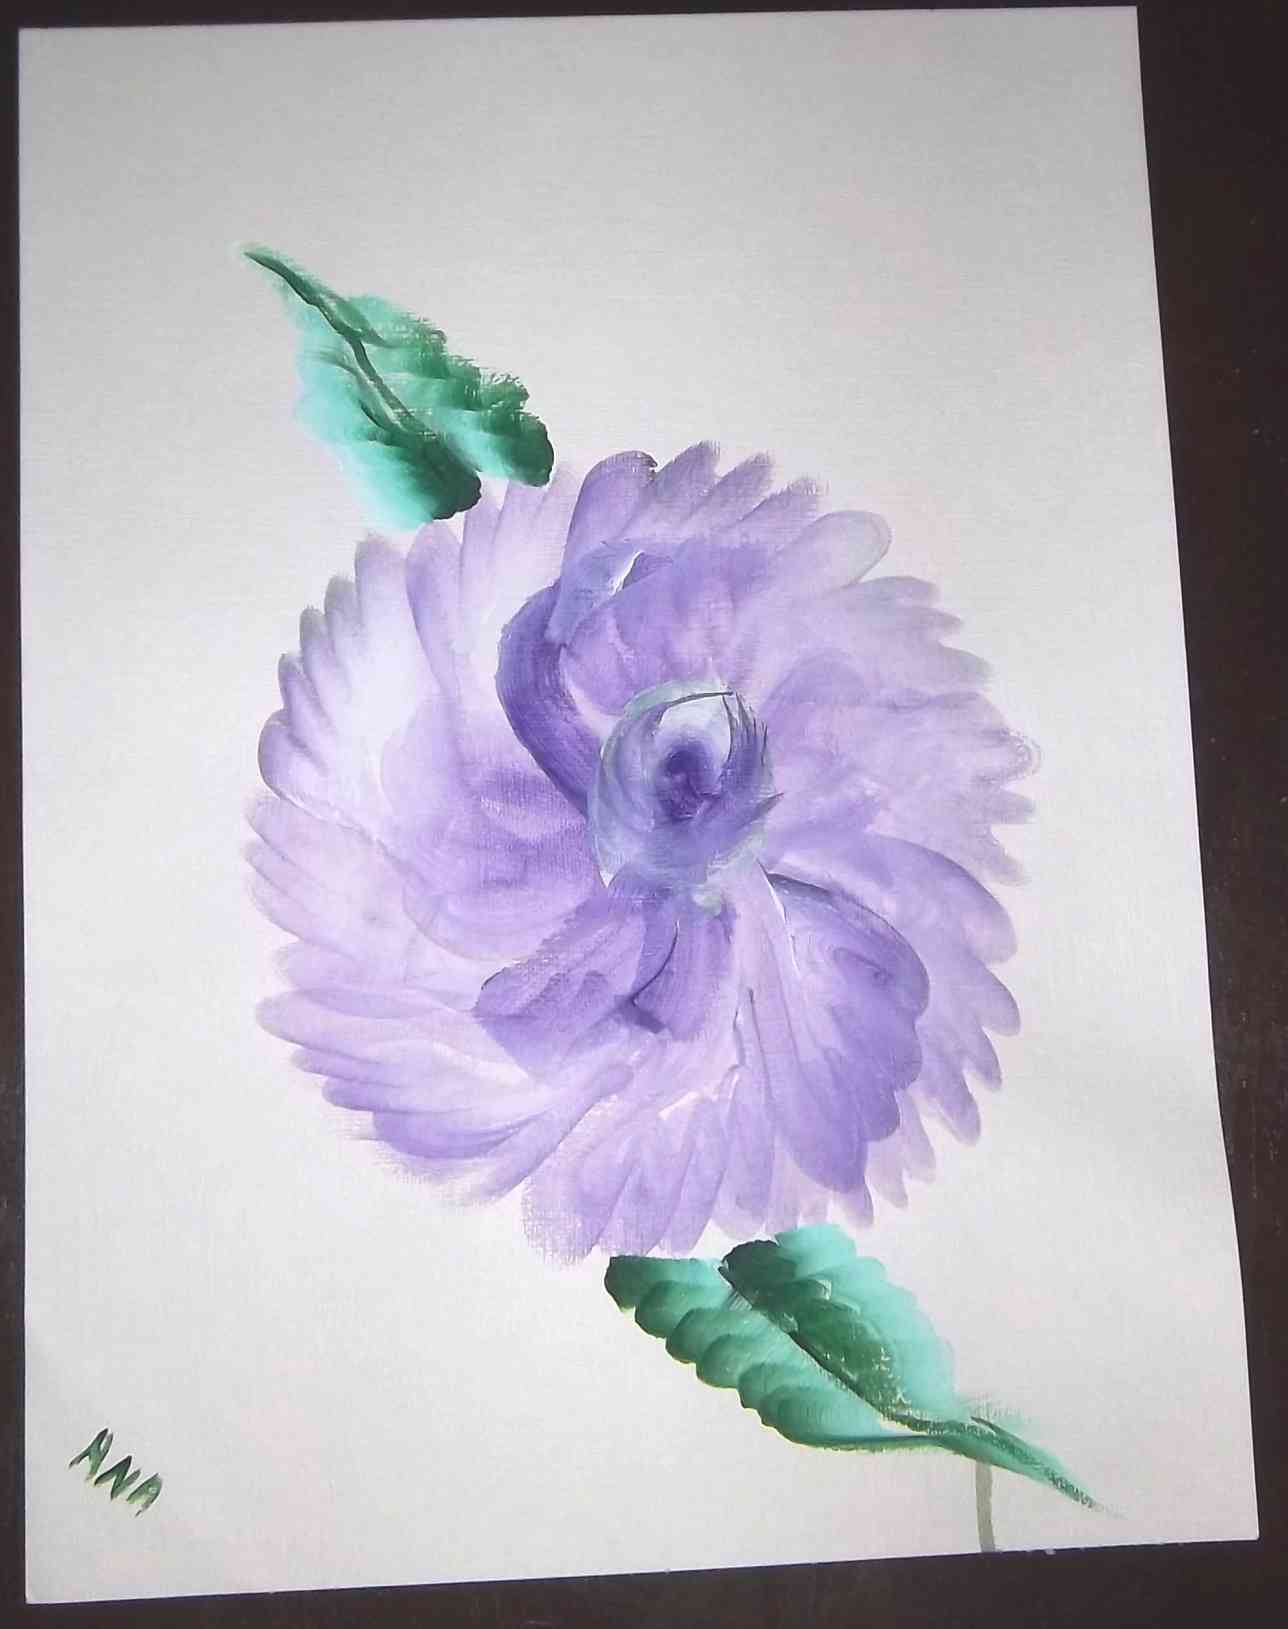 Water color by brazilian artist Ana Diaz paintings Violet Flowers water color on acrylic paper 